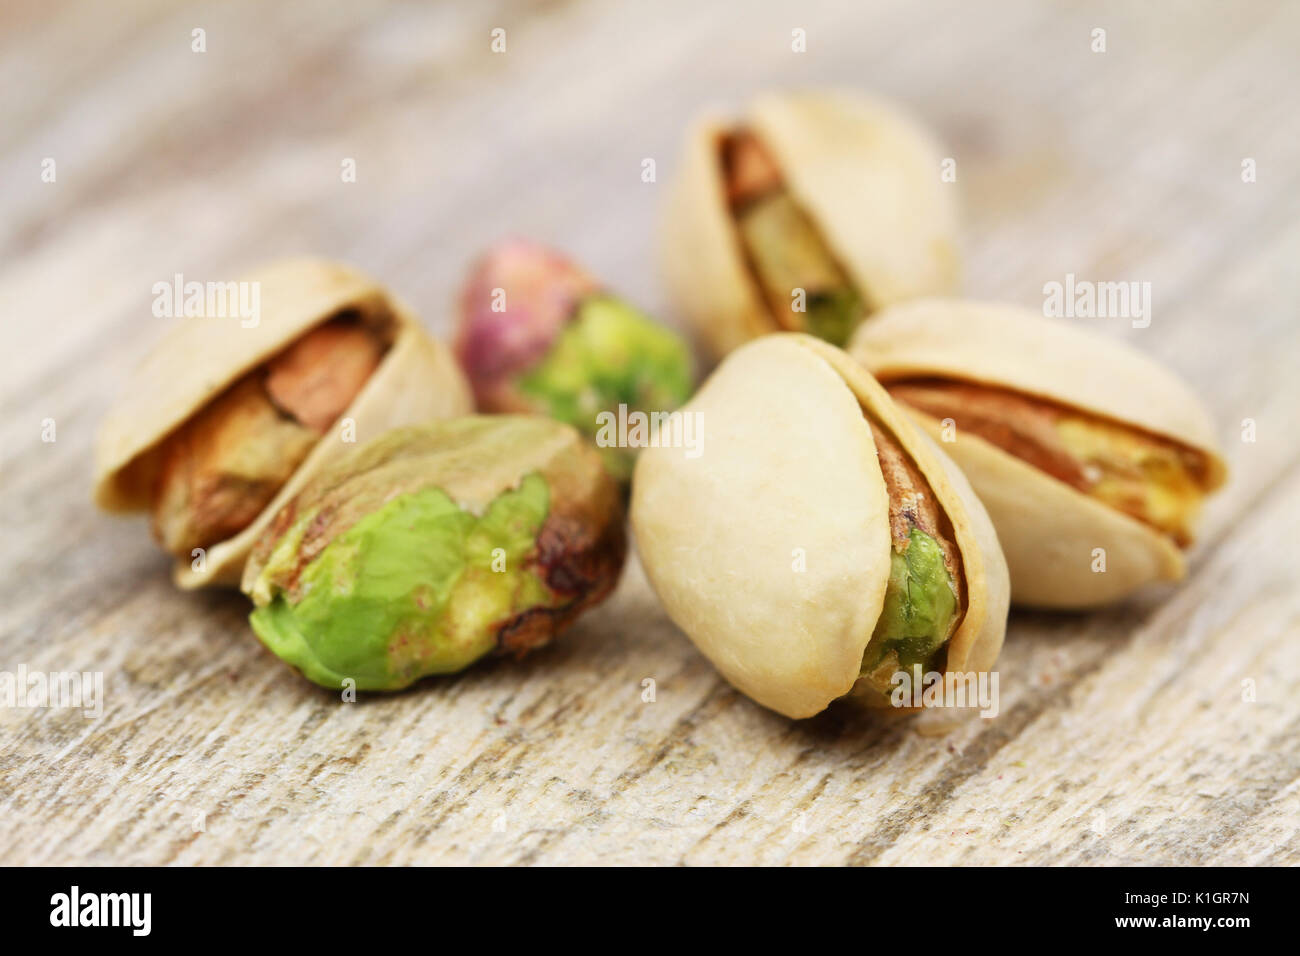 Pistachio nuts with and without shell, closeup Stock Photo